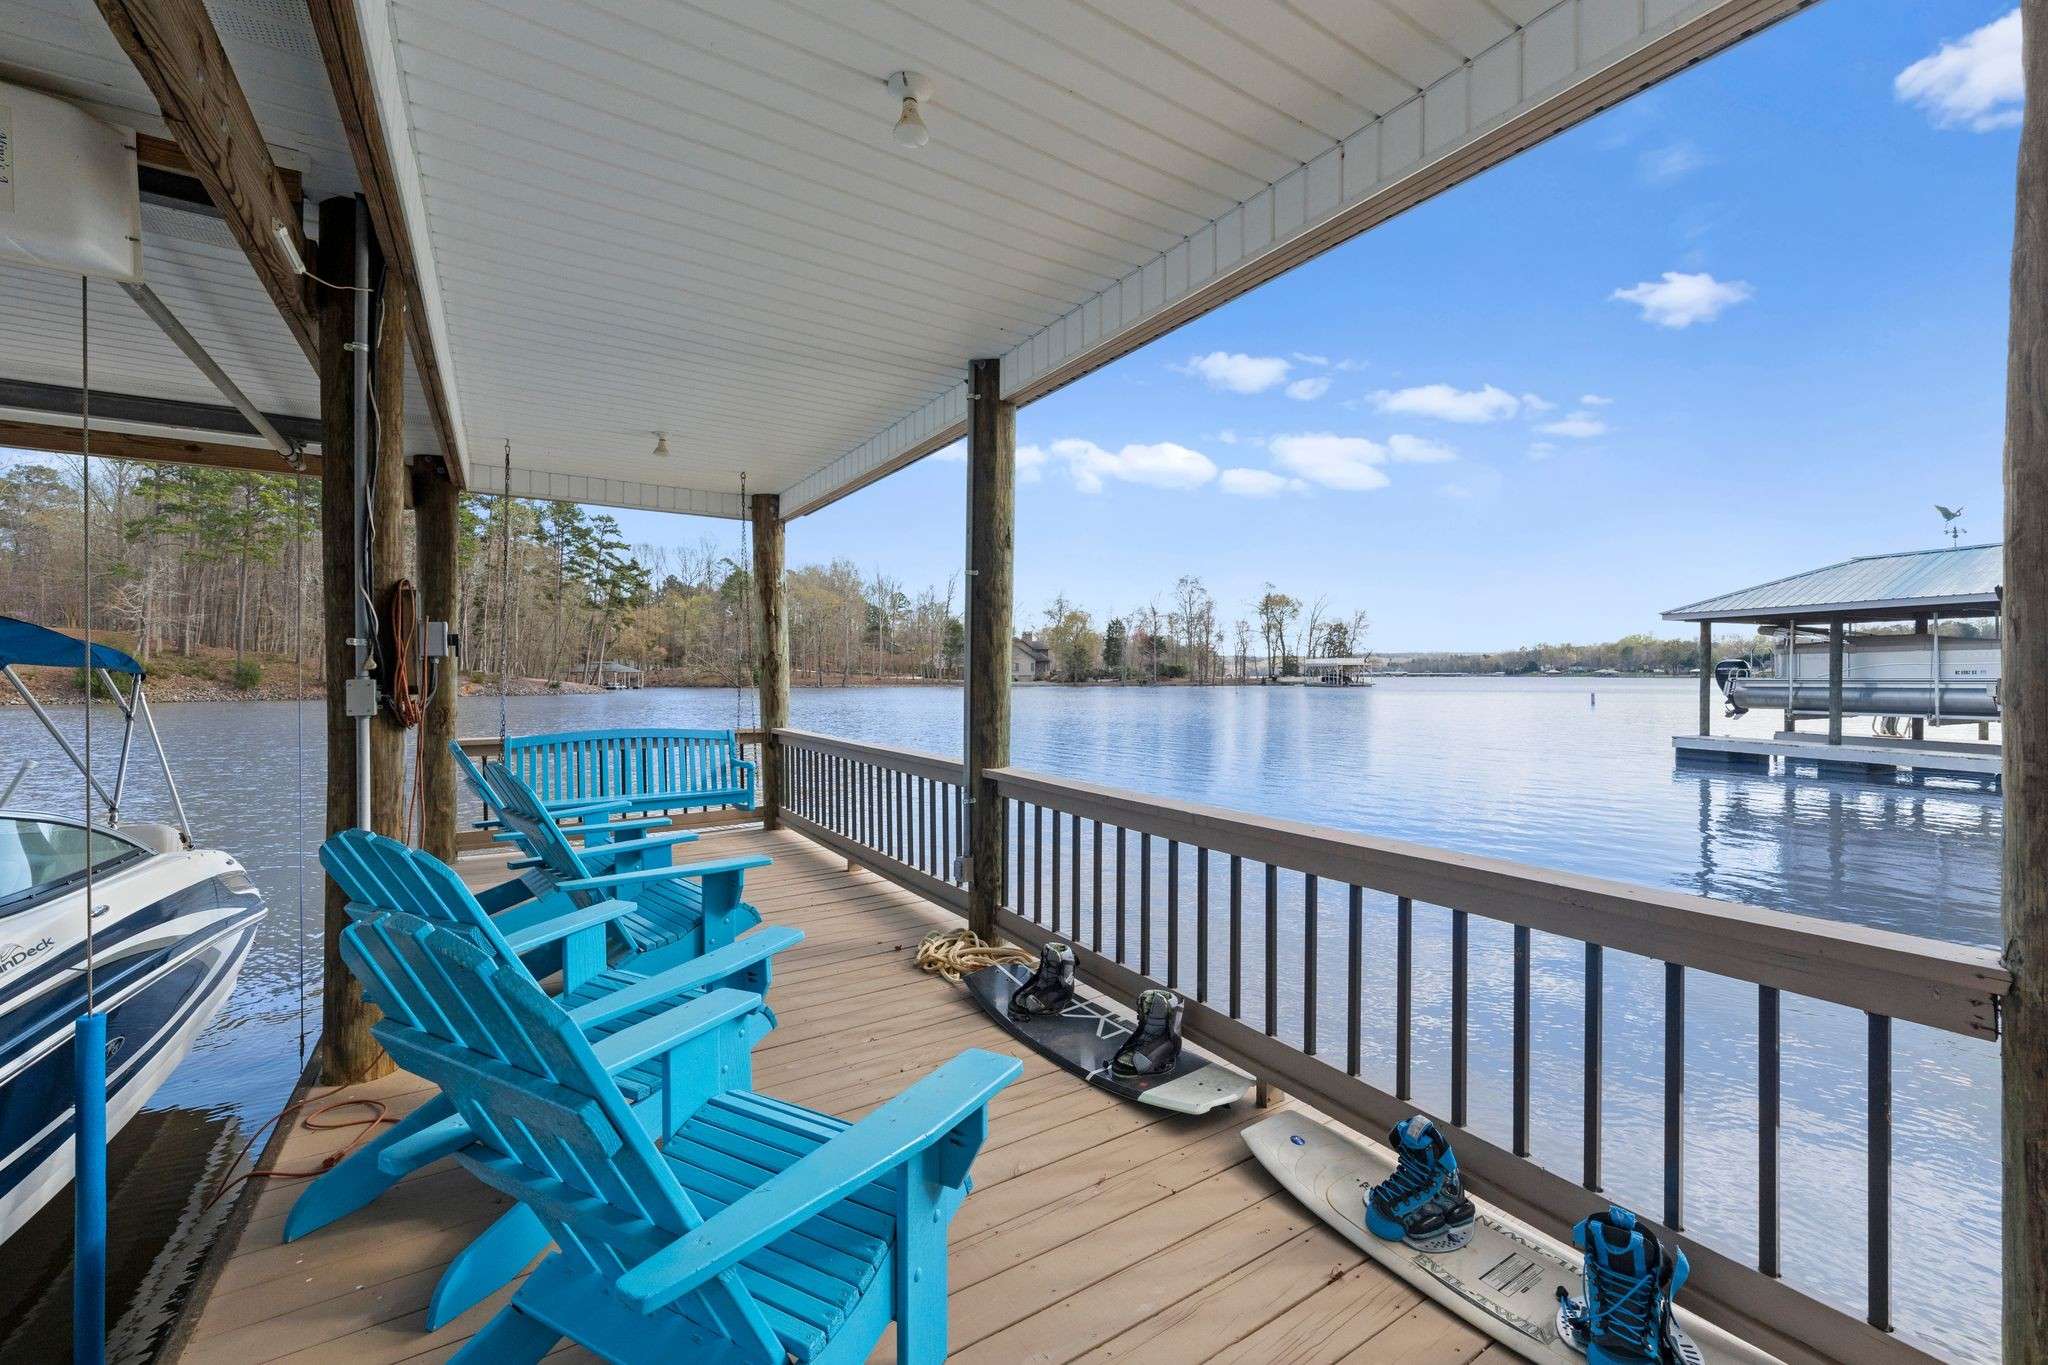 62 of 79. Exterior Day Time Photo - 846 Armstrong Rd - Showcasing View from Sitting area on Covered Dock.